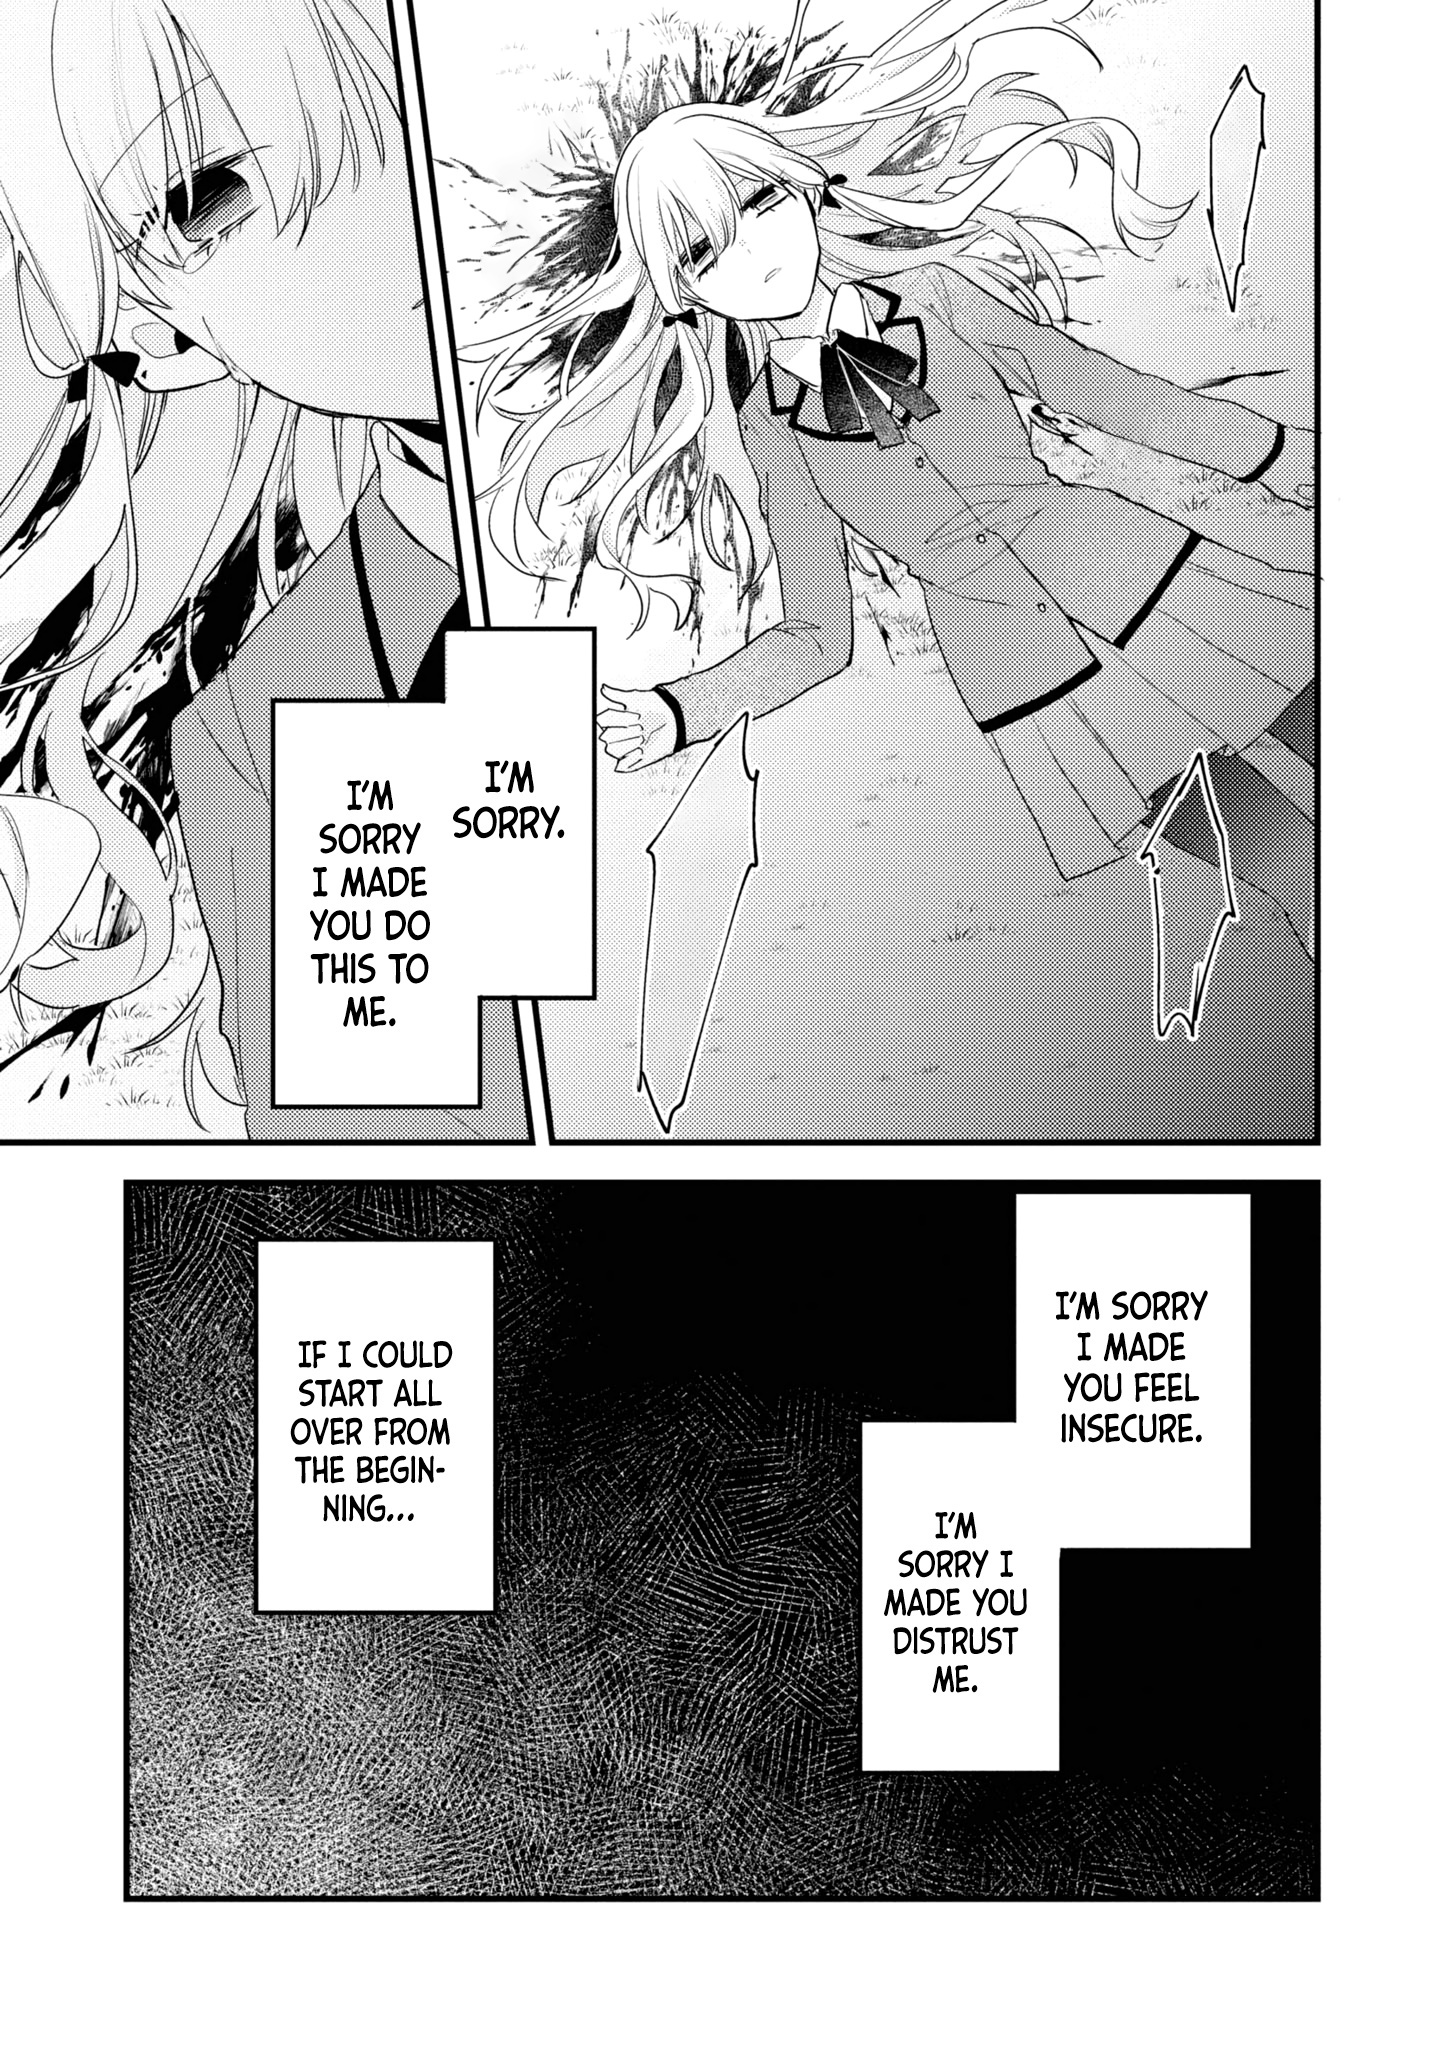 I Have A Second Chance At Life, So I’Ll Pamper My Yandere Boyfriend For A Happy Ending!! Chapter 1 #7